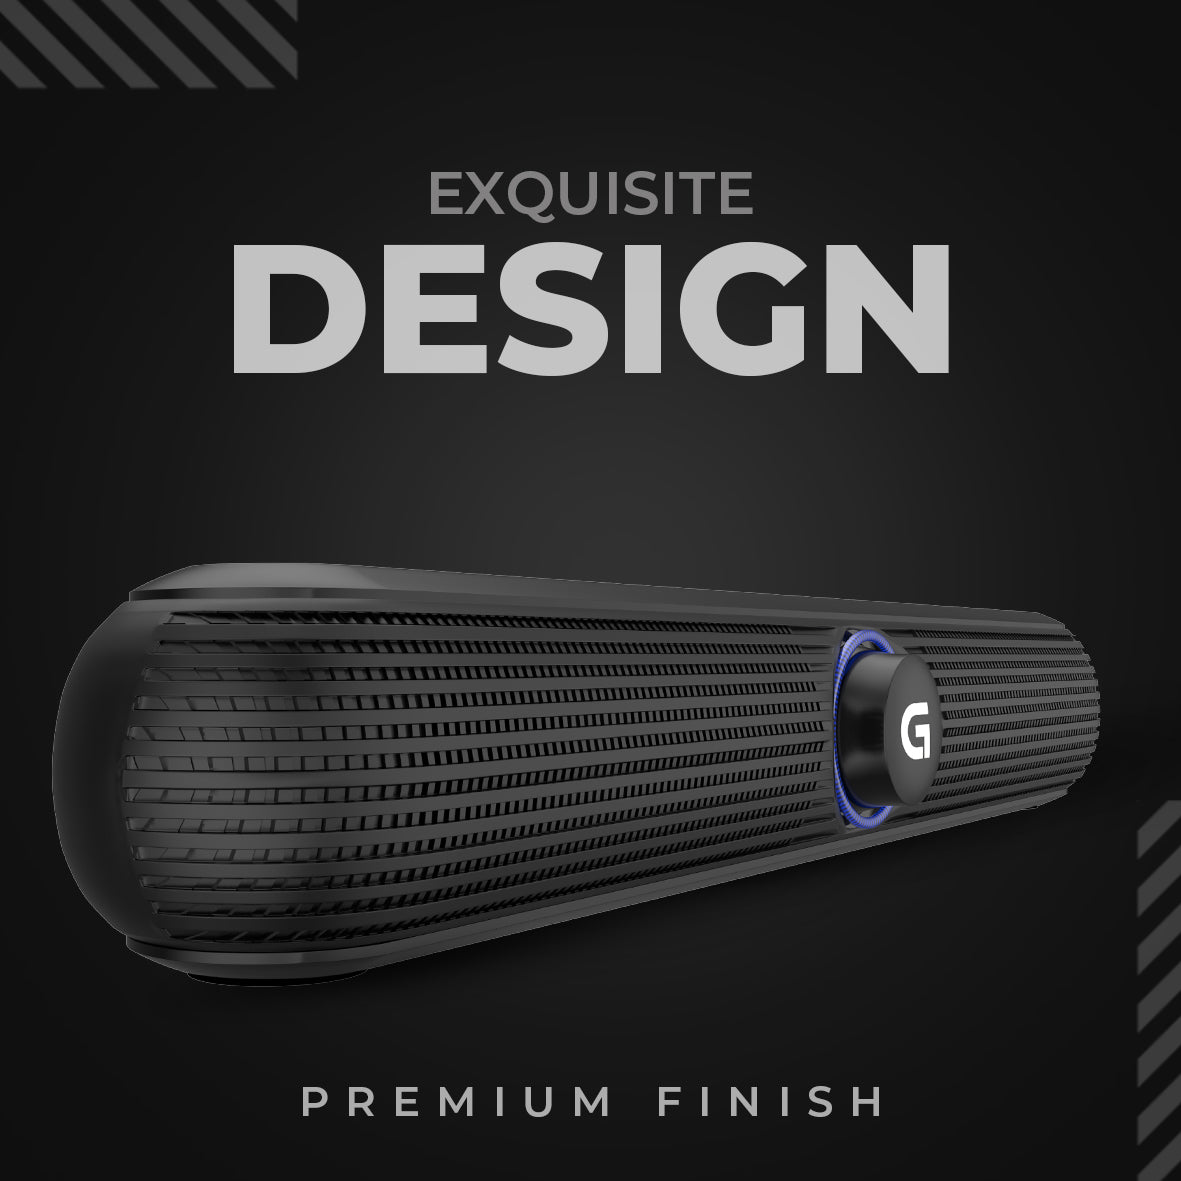 GIZMORE 1000 Pro Wireless Bluetooth Soundbar Speaker, 4Hr Playtime, in-Built Mic & Extra Bass with USB, AUX, SD Card Connectivity and TWS Function